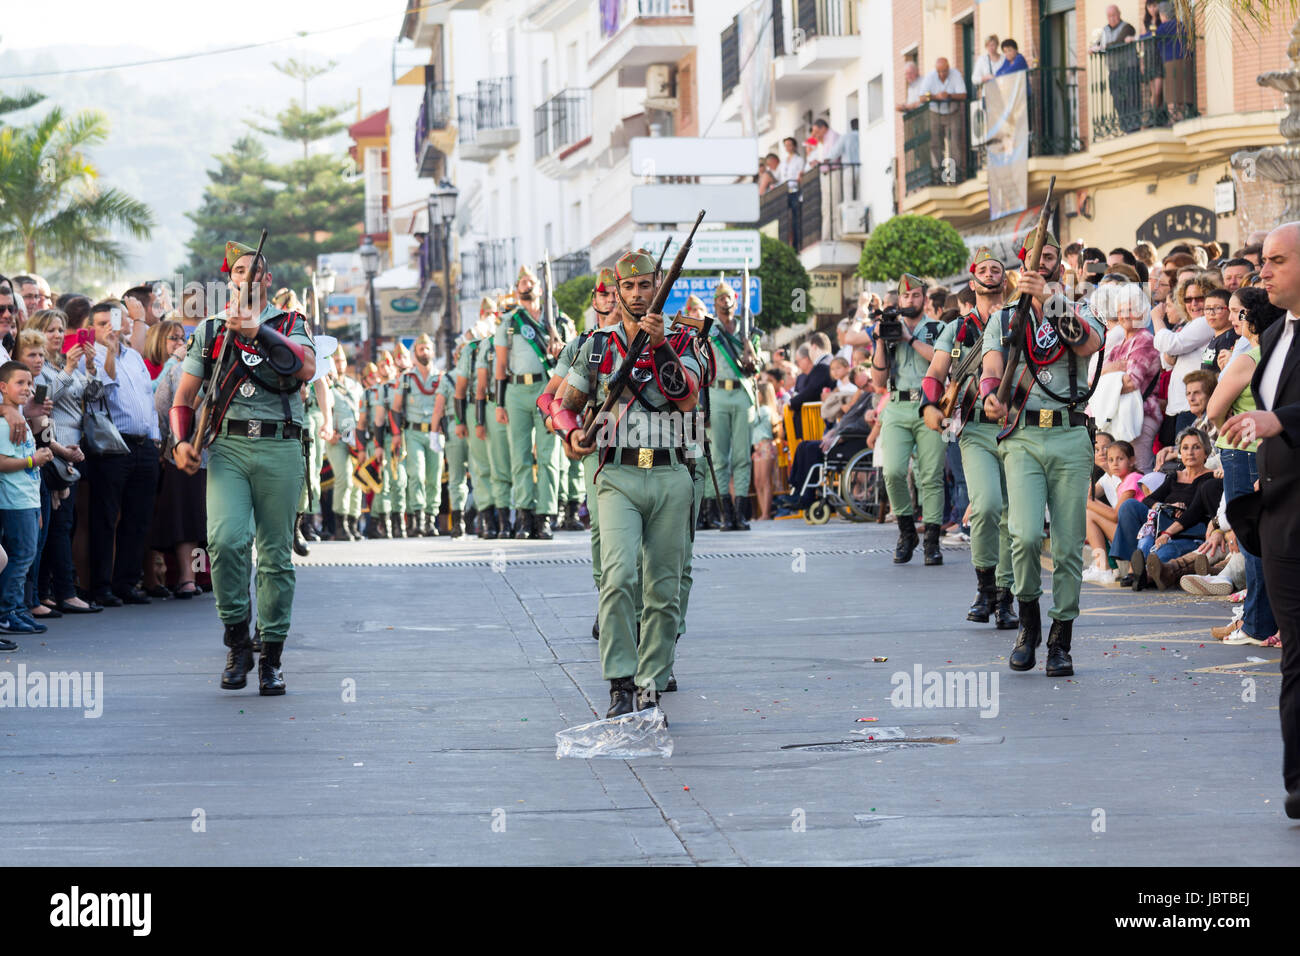 MALAGA, SPAIN - APRIL 18: Unidentified spanish legionnaires marching during an Easter parade on April 18, 2014 in Alhaurin de la Torre, Malaga, Spain. Stock Photo